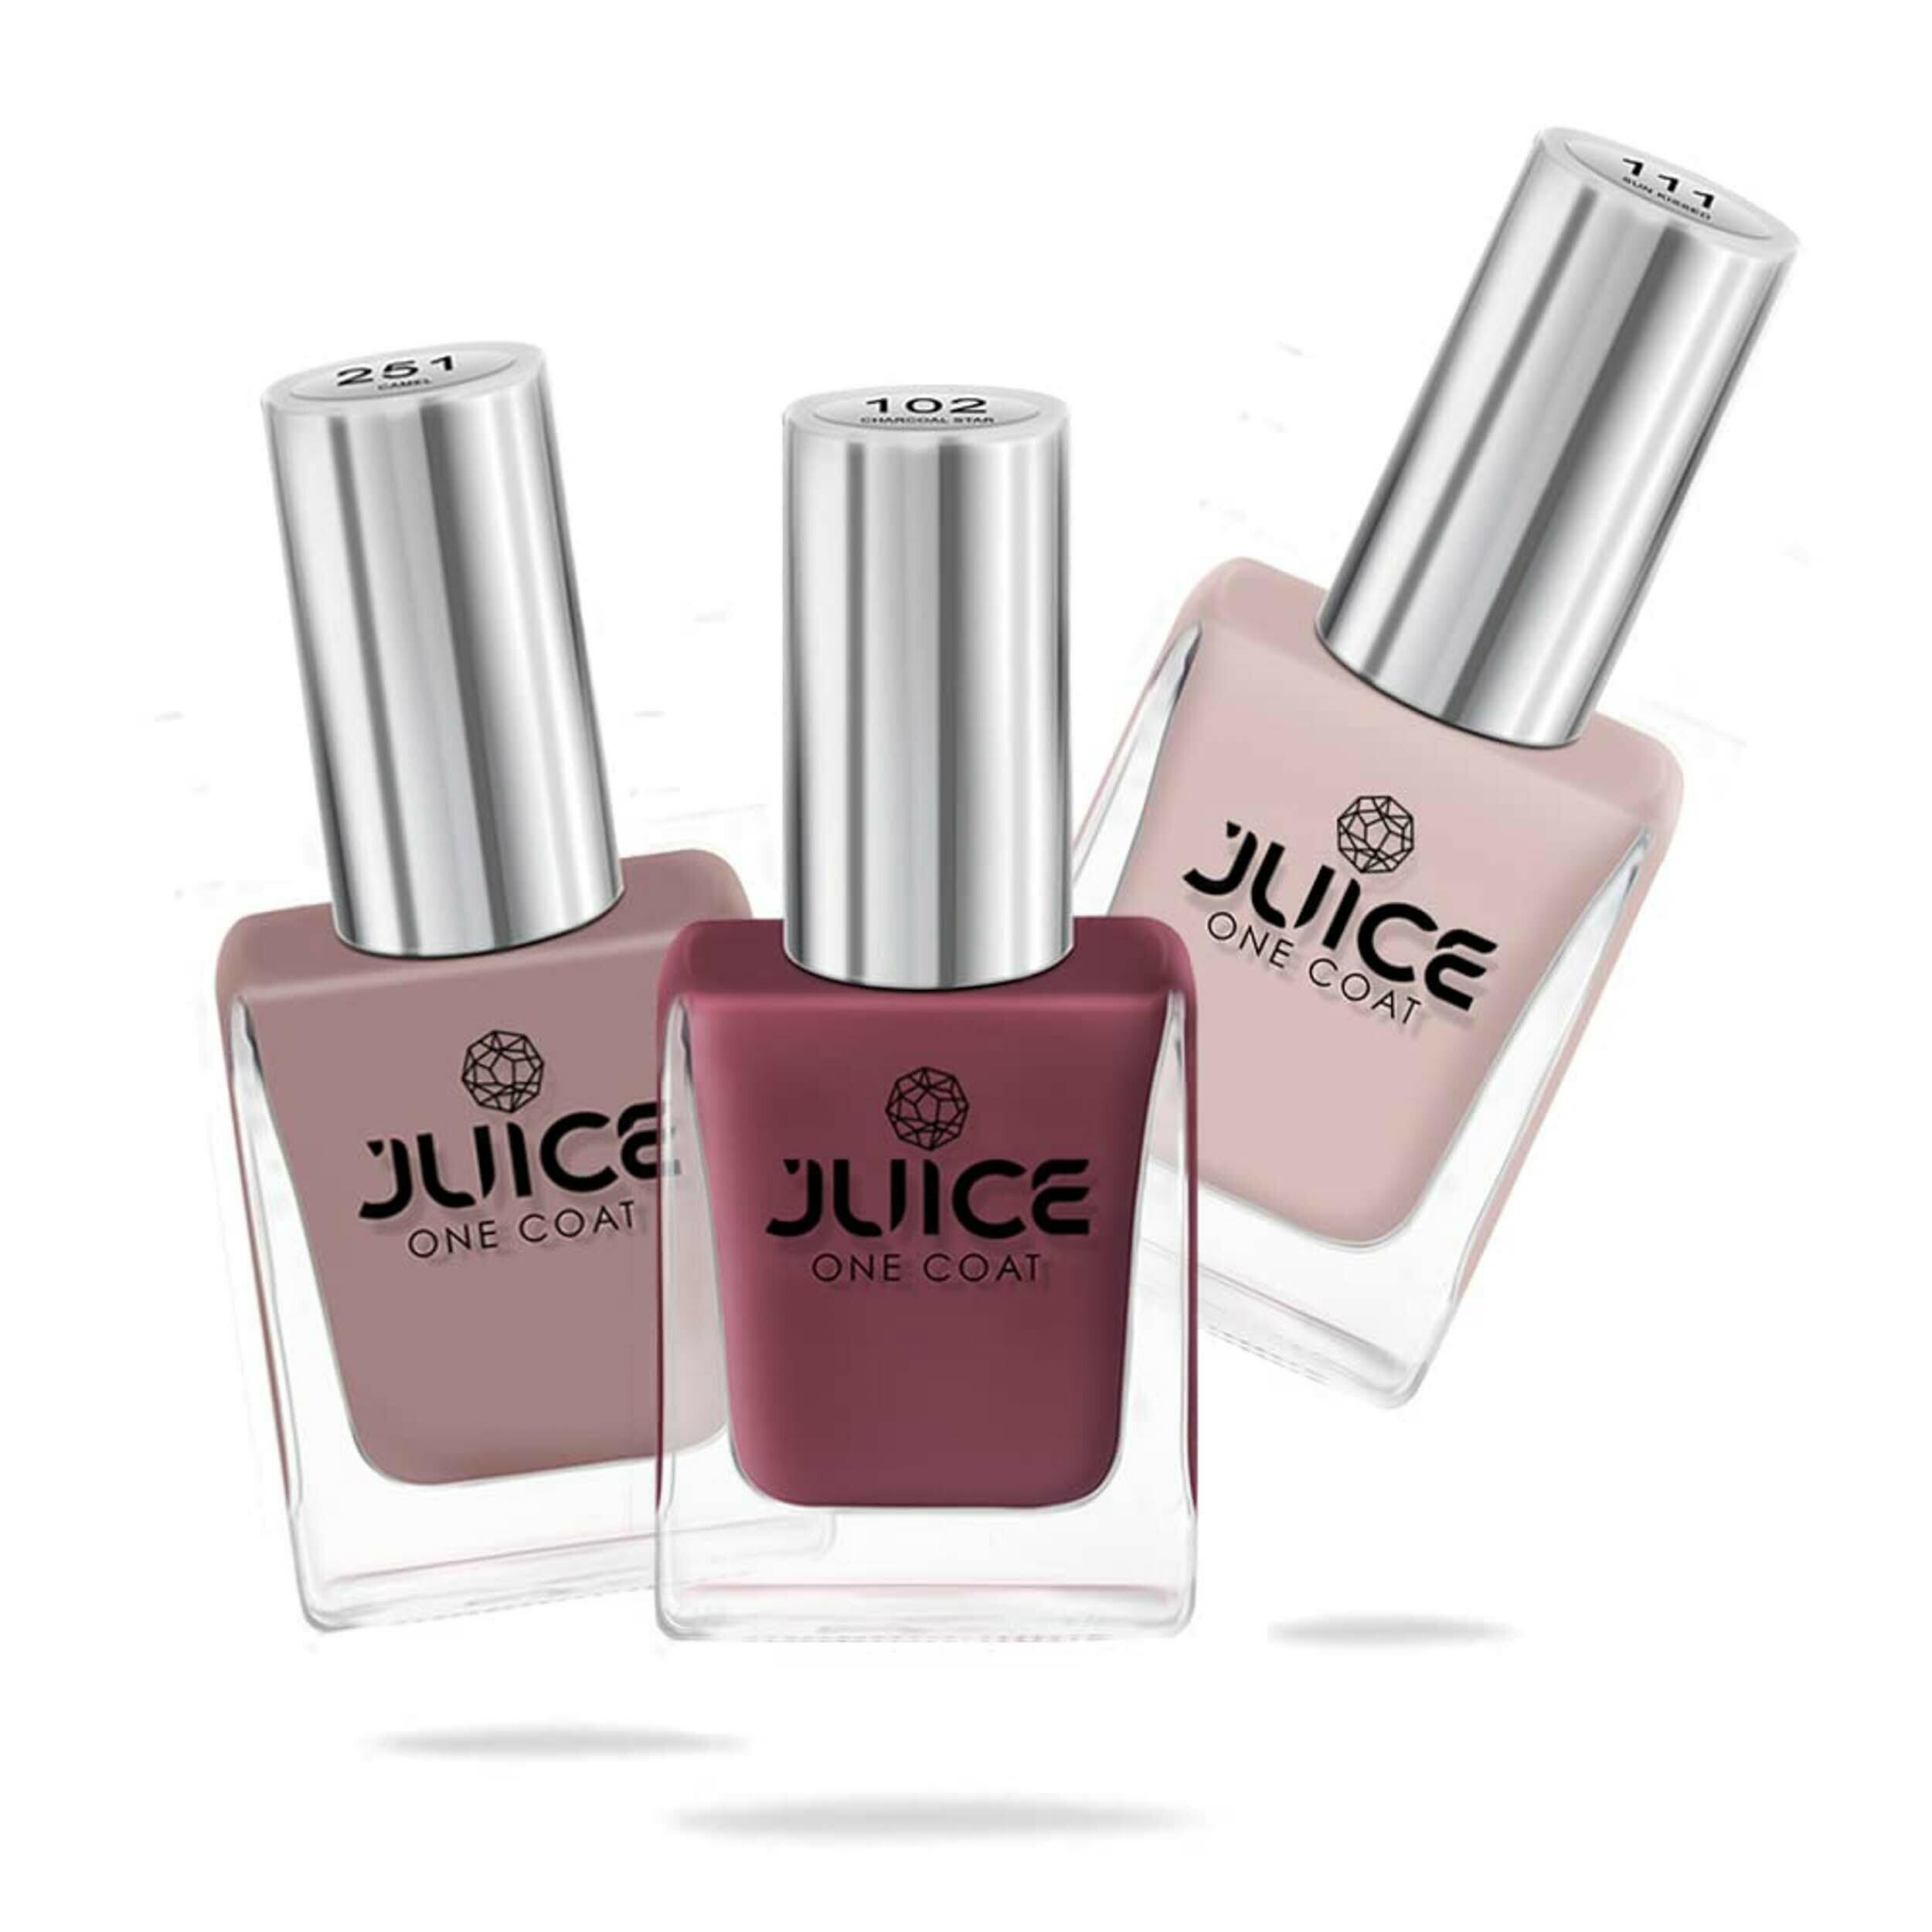 JUICE One Coat Nail Polish, Combo Pack of 3, Nude Collection, High Gloss,  Chip Resistant, Quick Dry, Gel Effect, Shades : Sun Kissed / Dusty Coral /  Camel NUDE GLOSS COMBO 27, 11ml each - JioMart